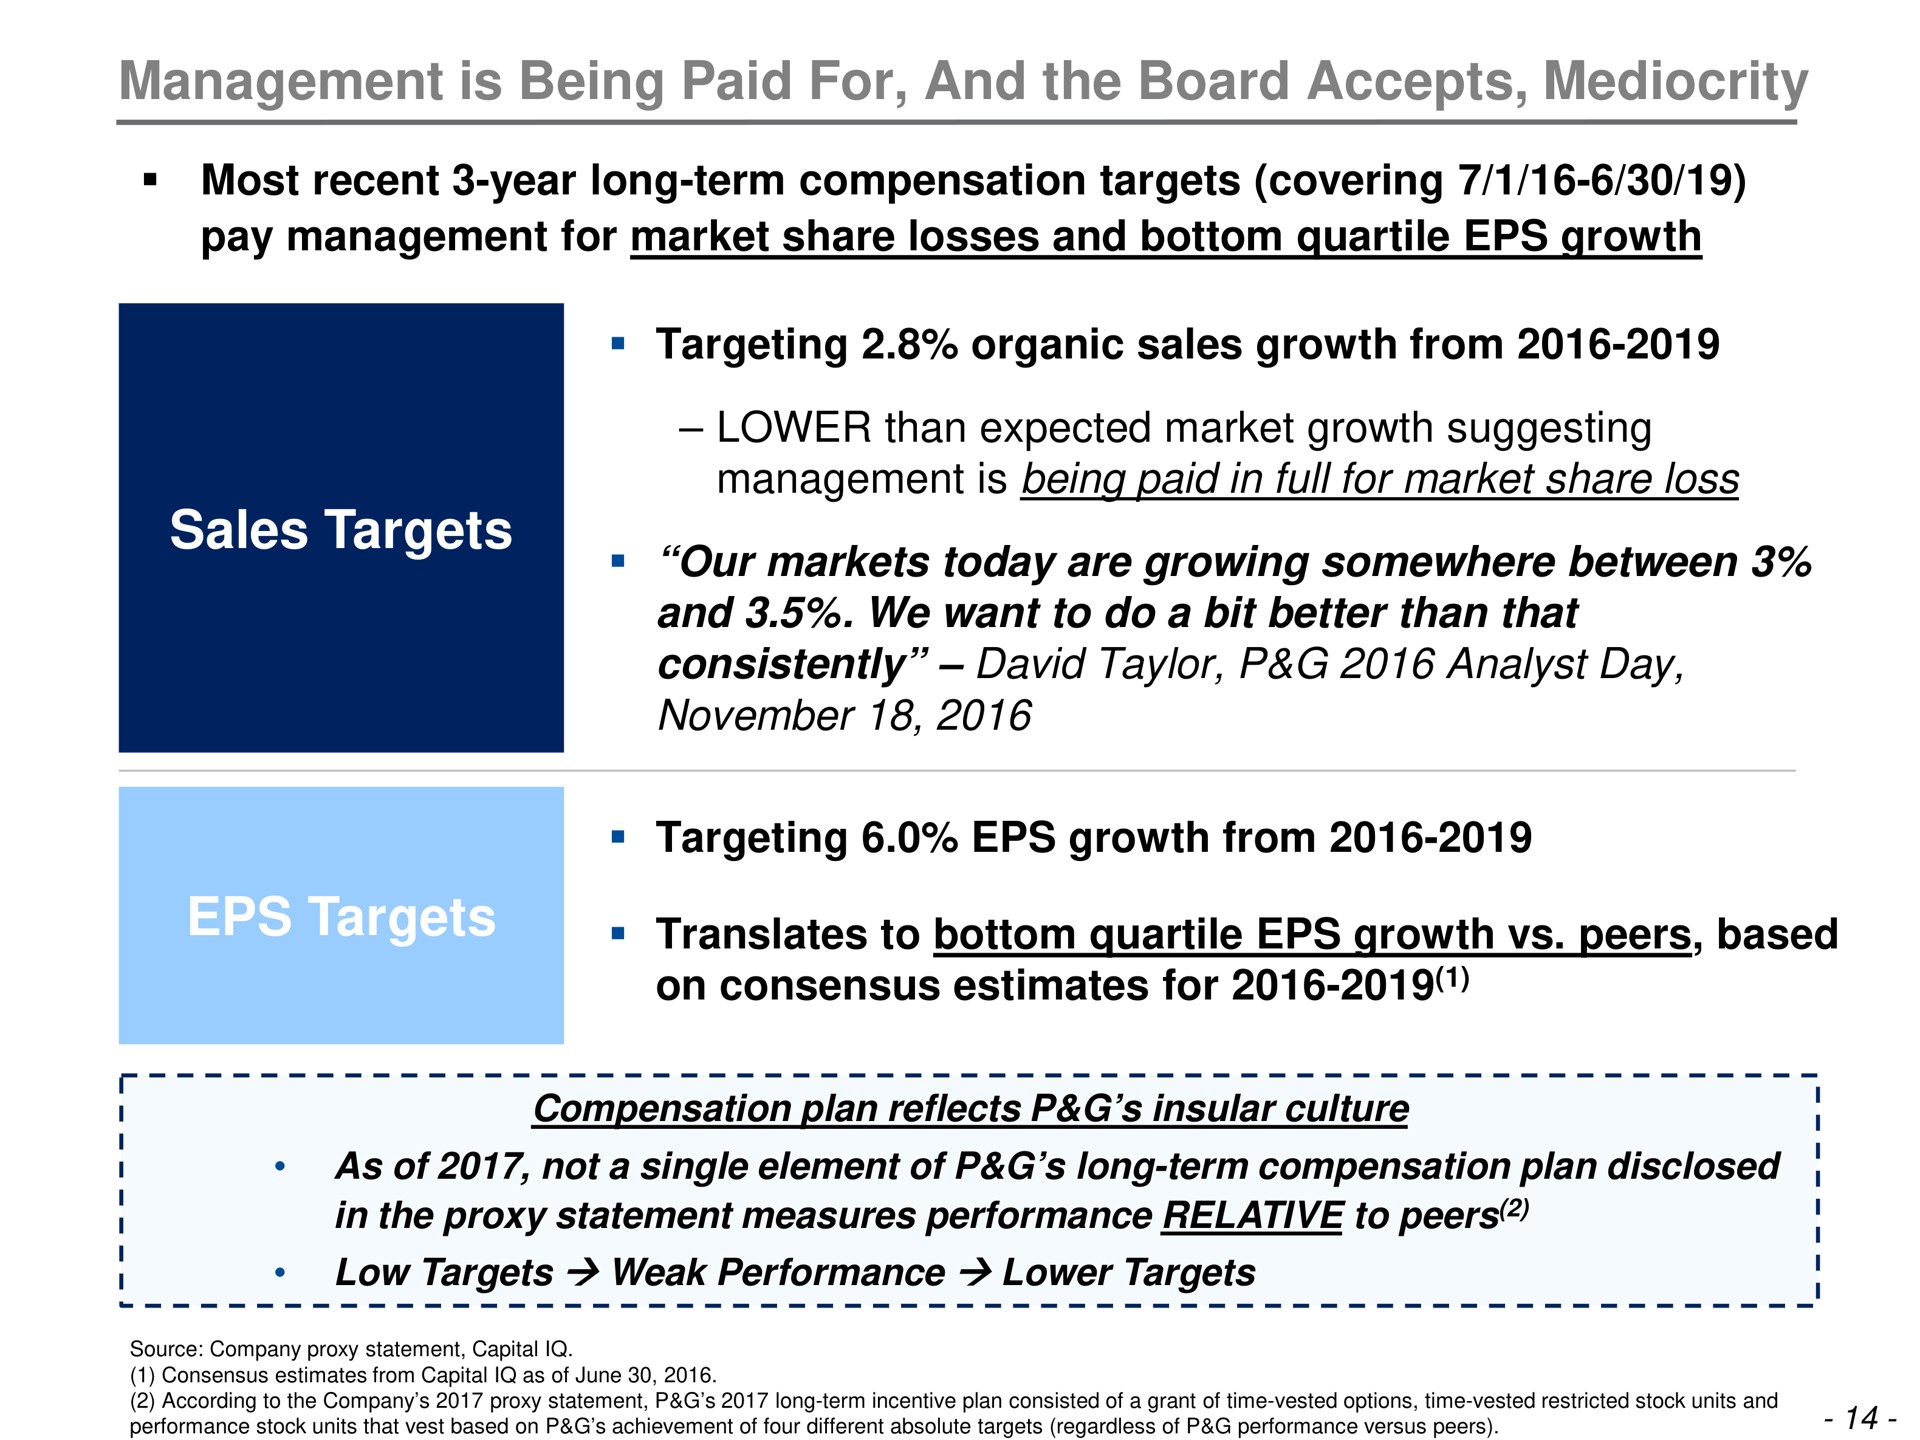 management is being paid for and the board accepts mediocrity most recent year long term compensation targets covering pay management for market share losses and bottom quartile growth sales targets targeting organic sales growth from lower than expected market growth suggesting management is being paid in full for market share loss our markets today are growing somewhere between and we want to do a bit better than that consistently analyst day targeting growth from targets translates to bottom quartile growth peers based on consensus estimates for | Trian Partners